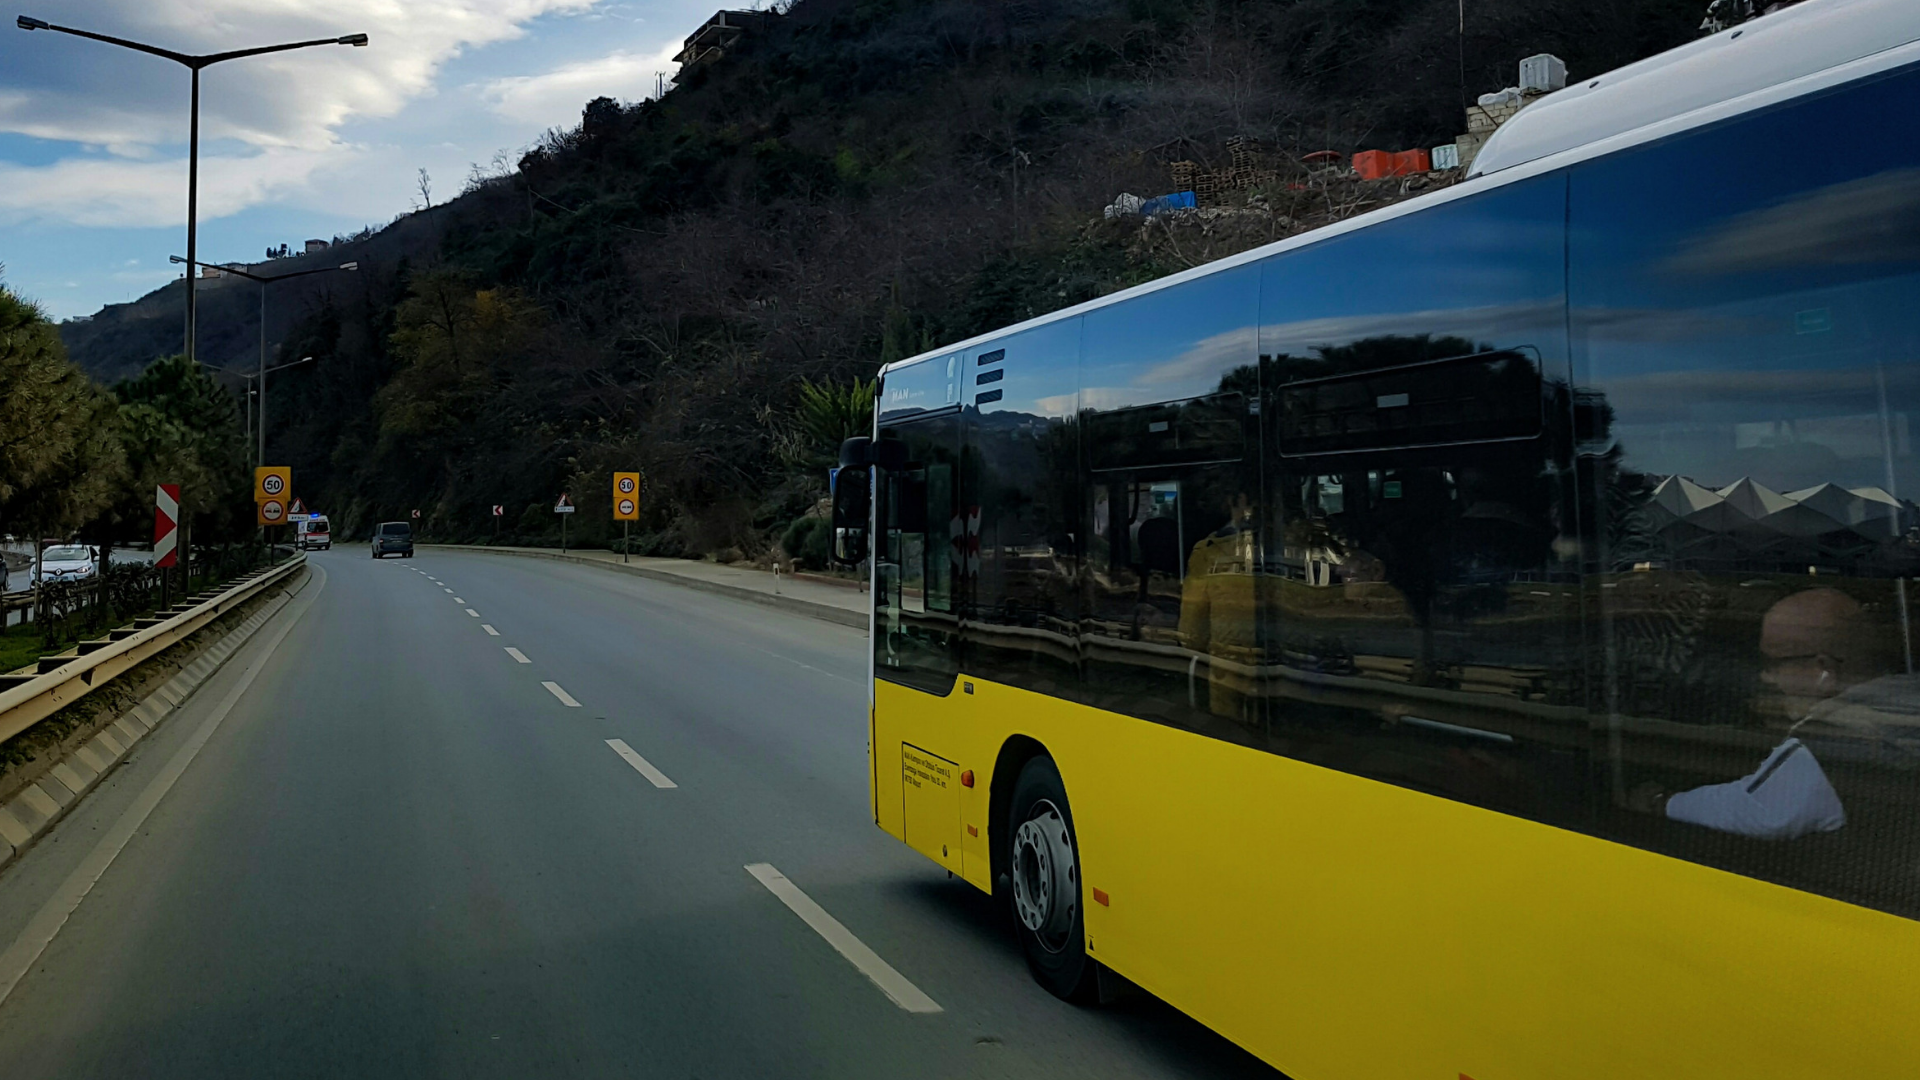 a bus in motion